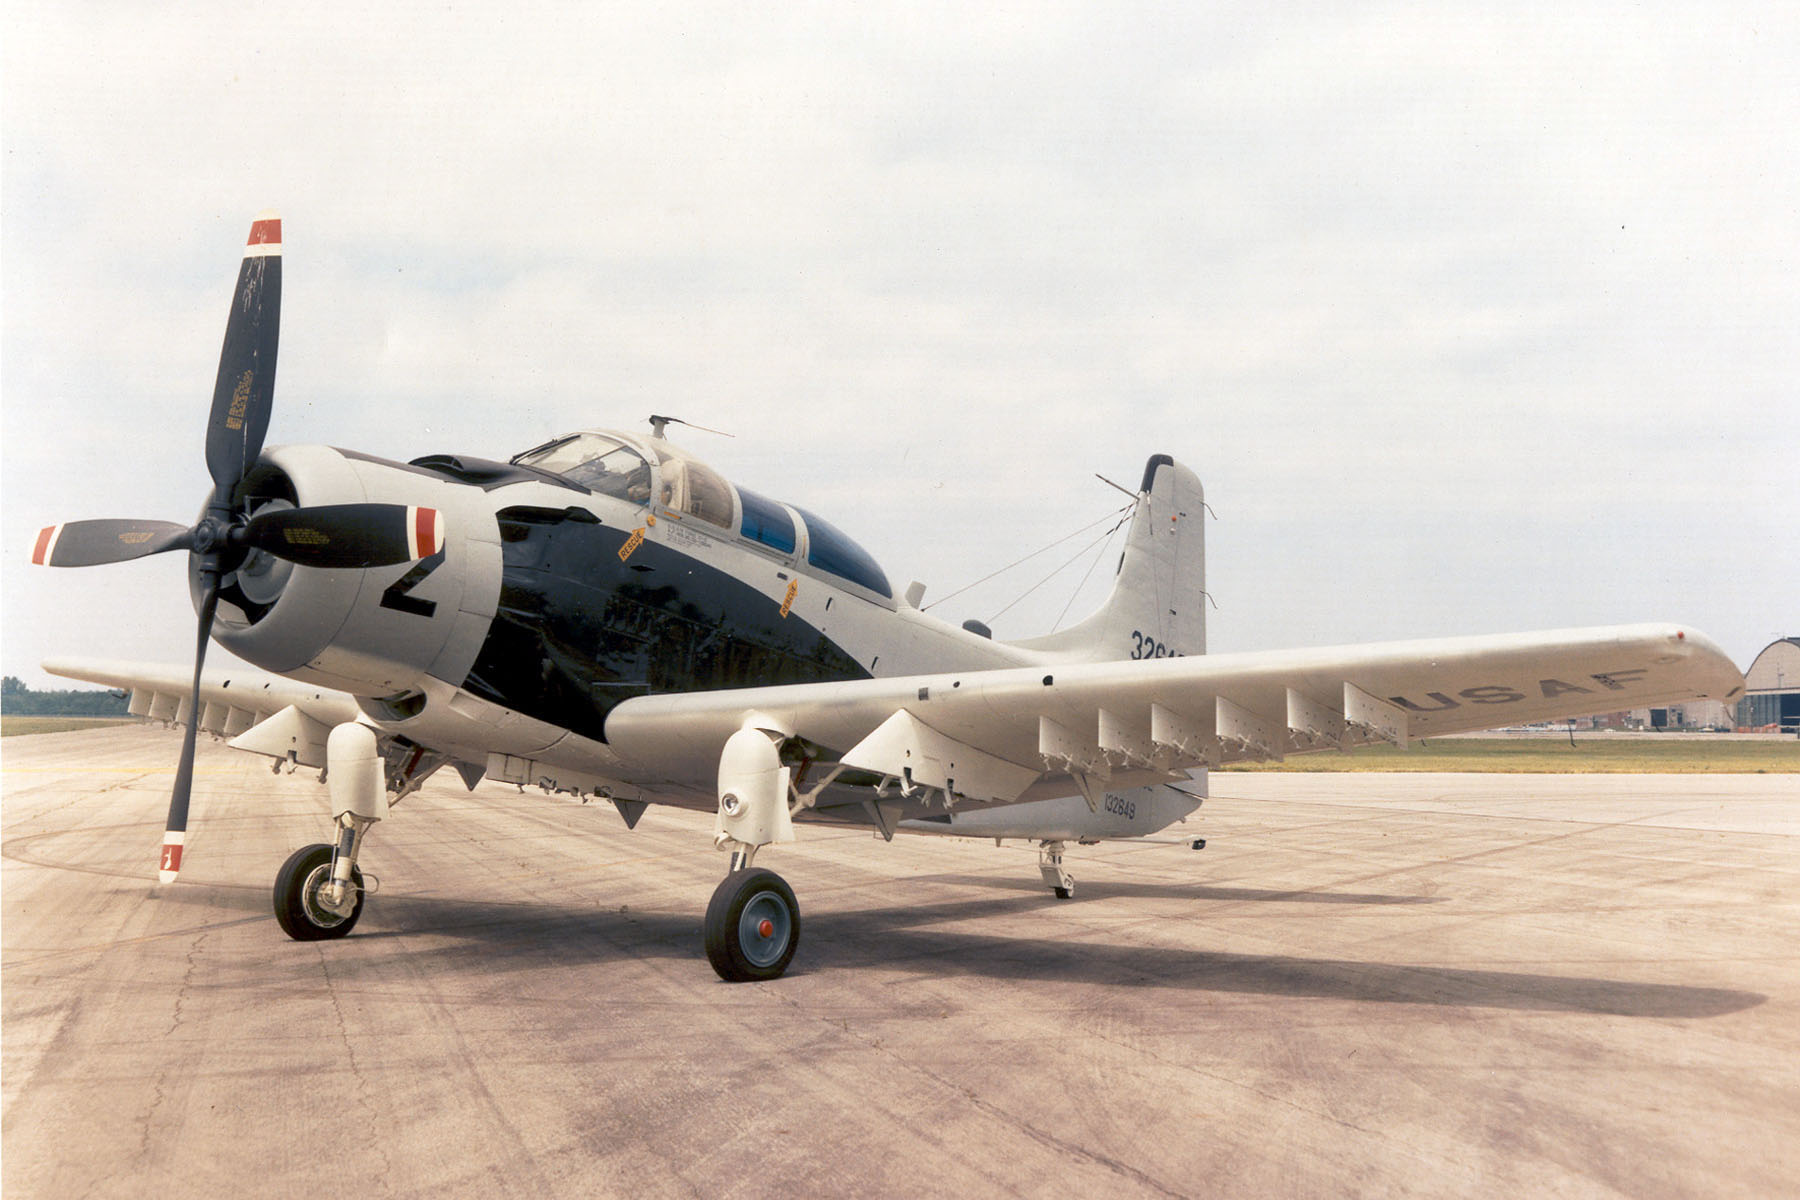 Major Bernard F. Fisher's Douglas A-1E Skyraider, serial number 52-132649, at the National Museum of the United States Air Force, Wright-Patterson AFB, Ohio. (U.S. Air Force)